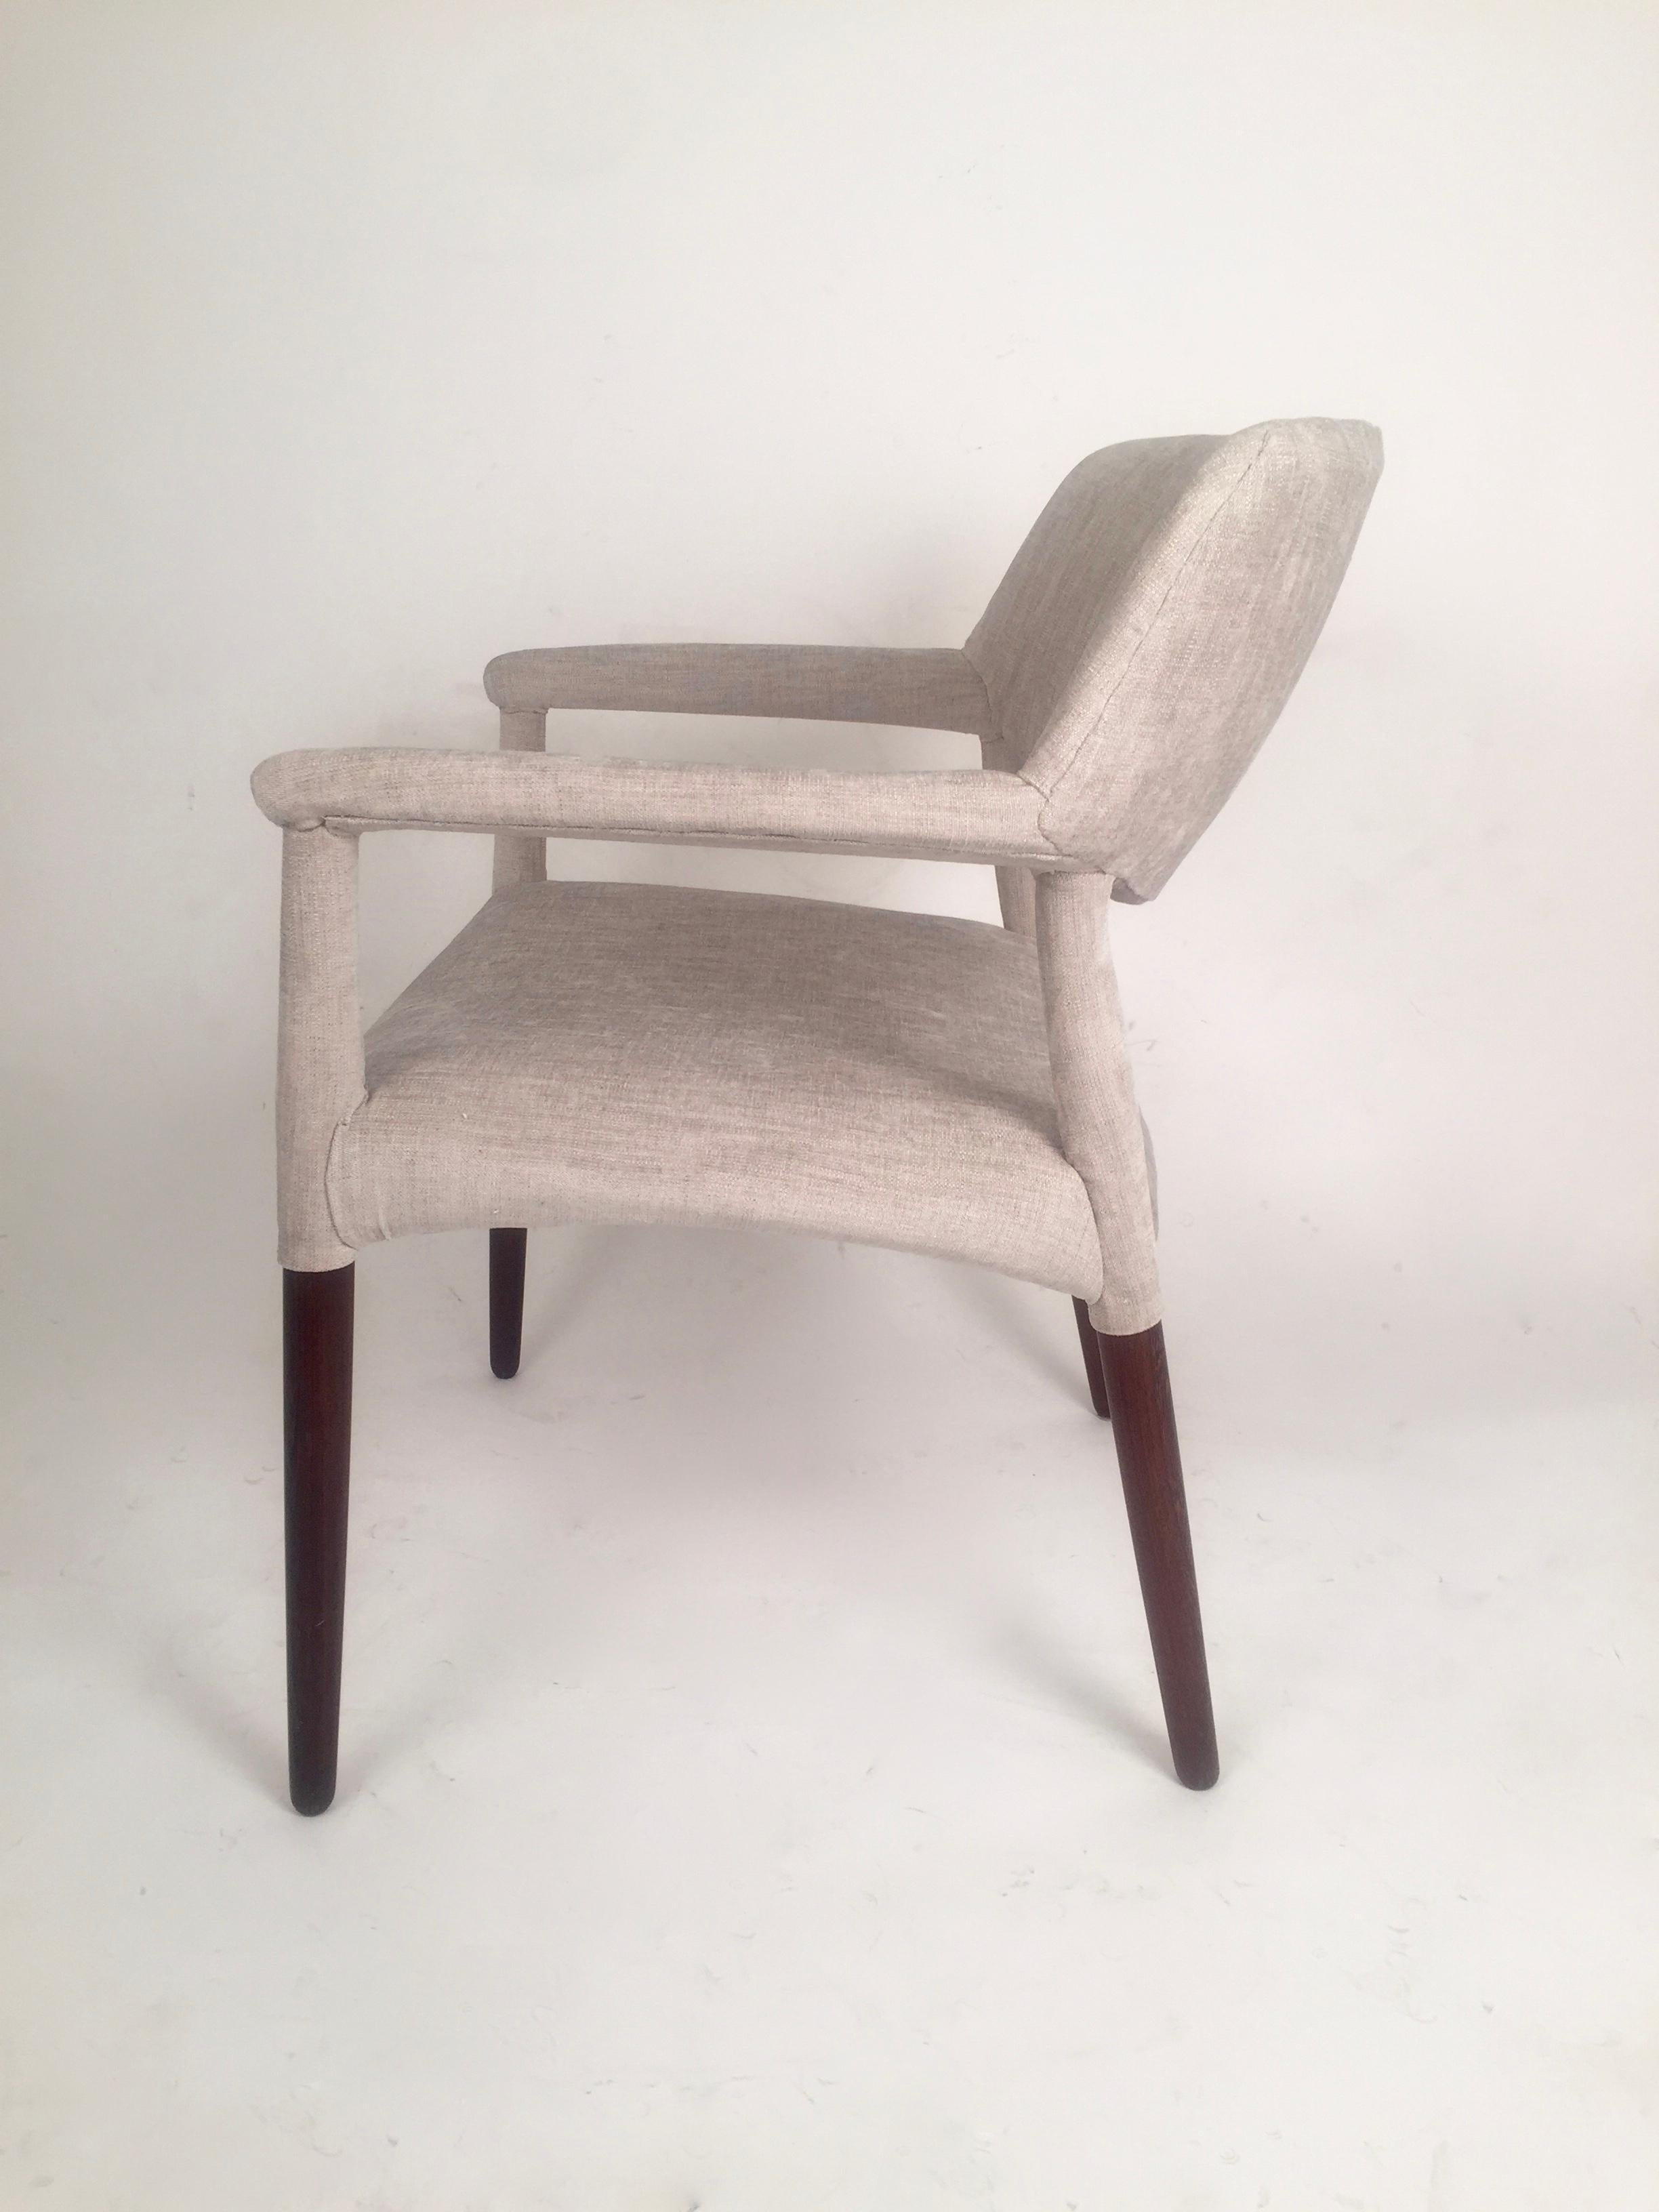 A Larsen and Madsen XXL armchair. Wenge frame. 1964 Design and later reupholstered in light gray velvet. Excellent condition..